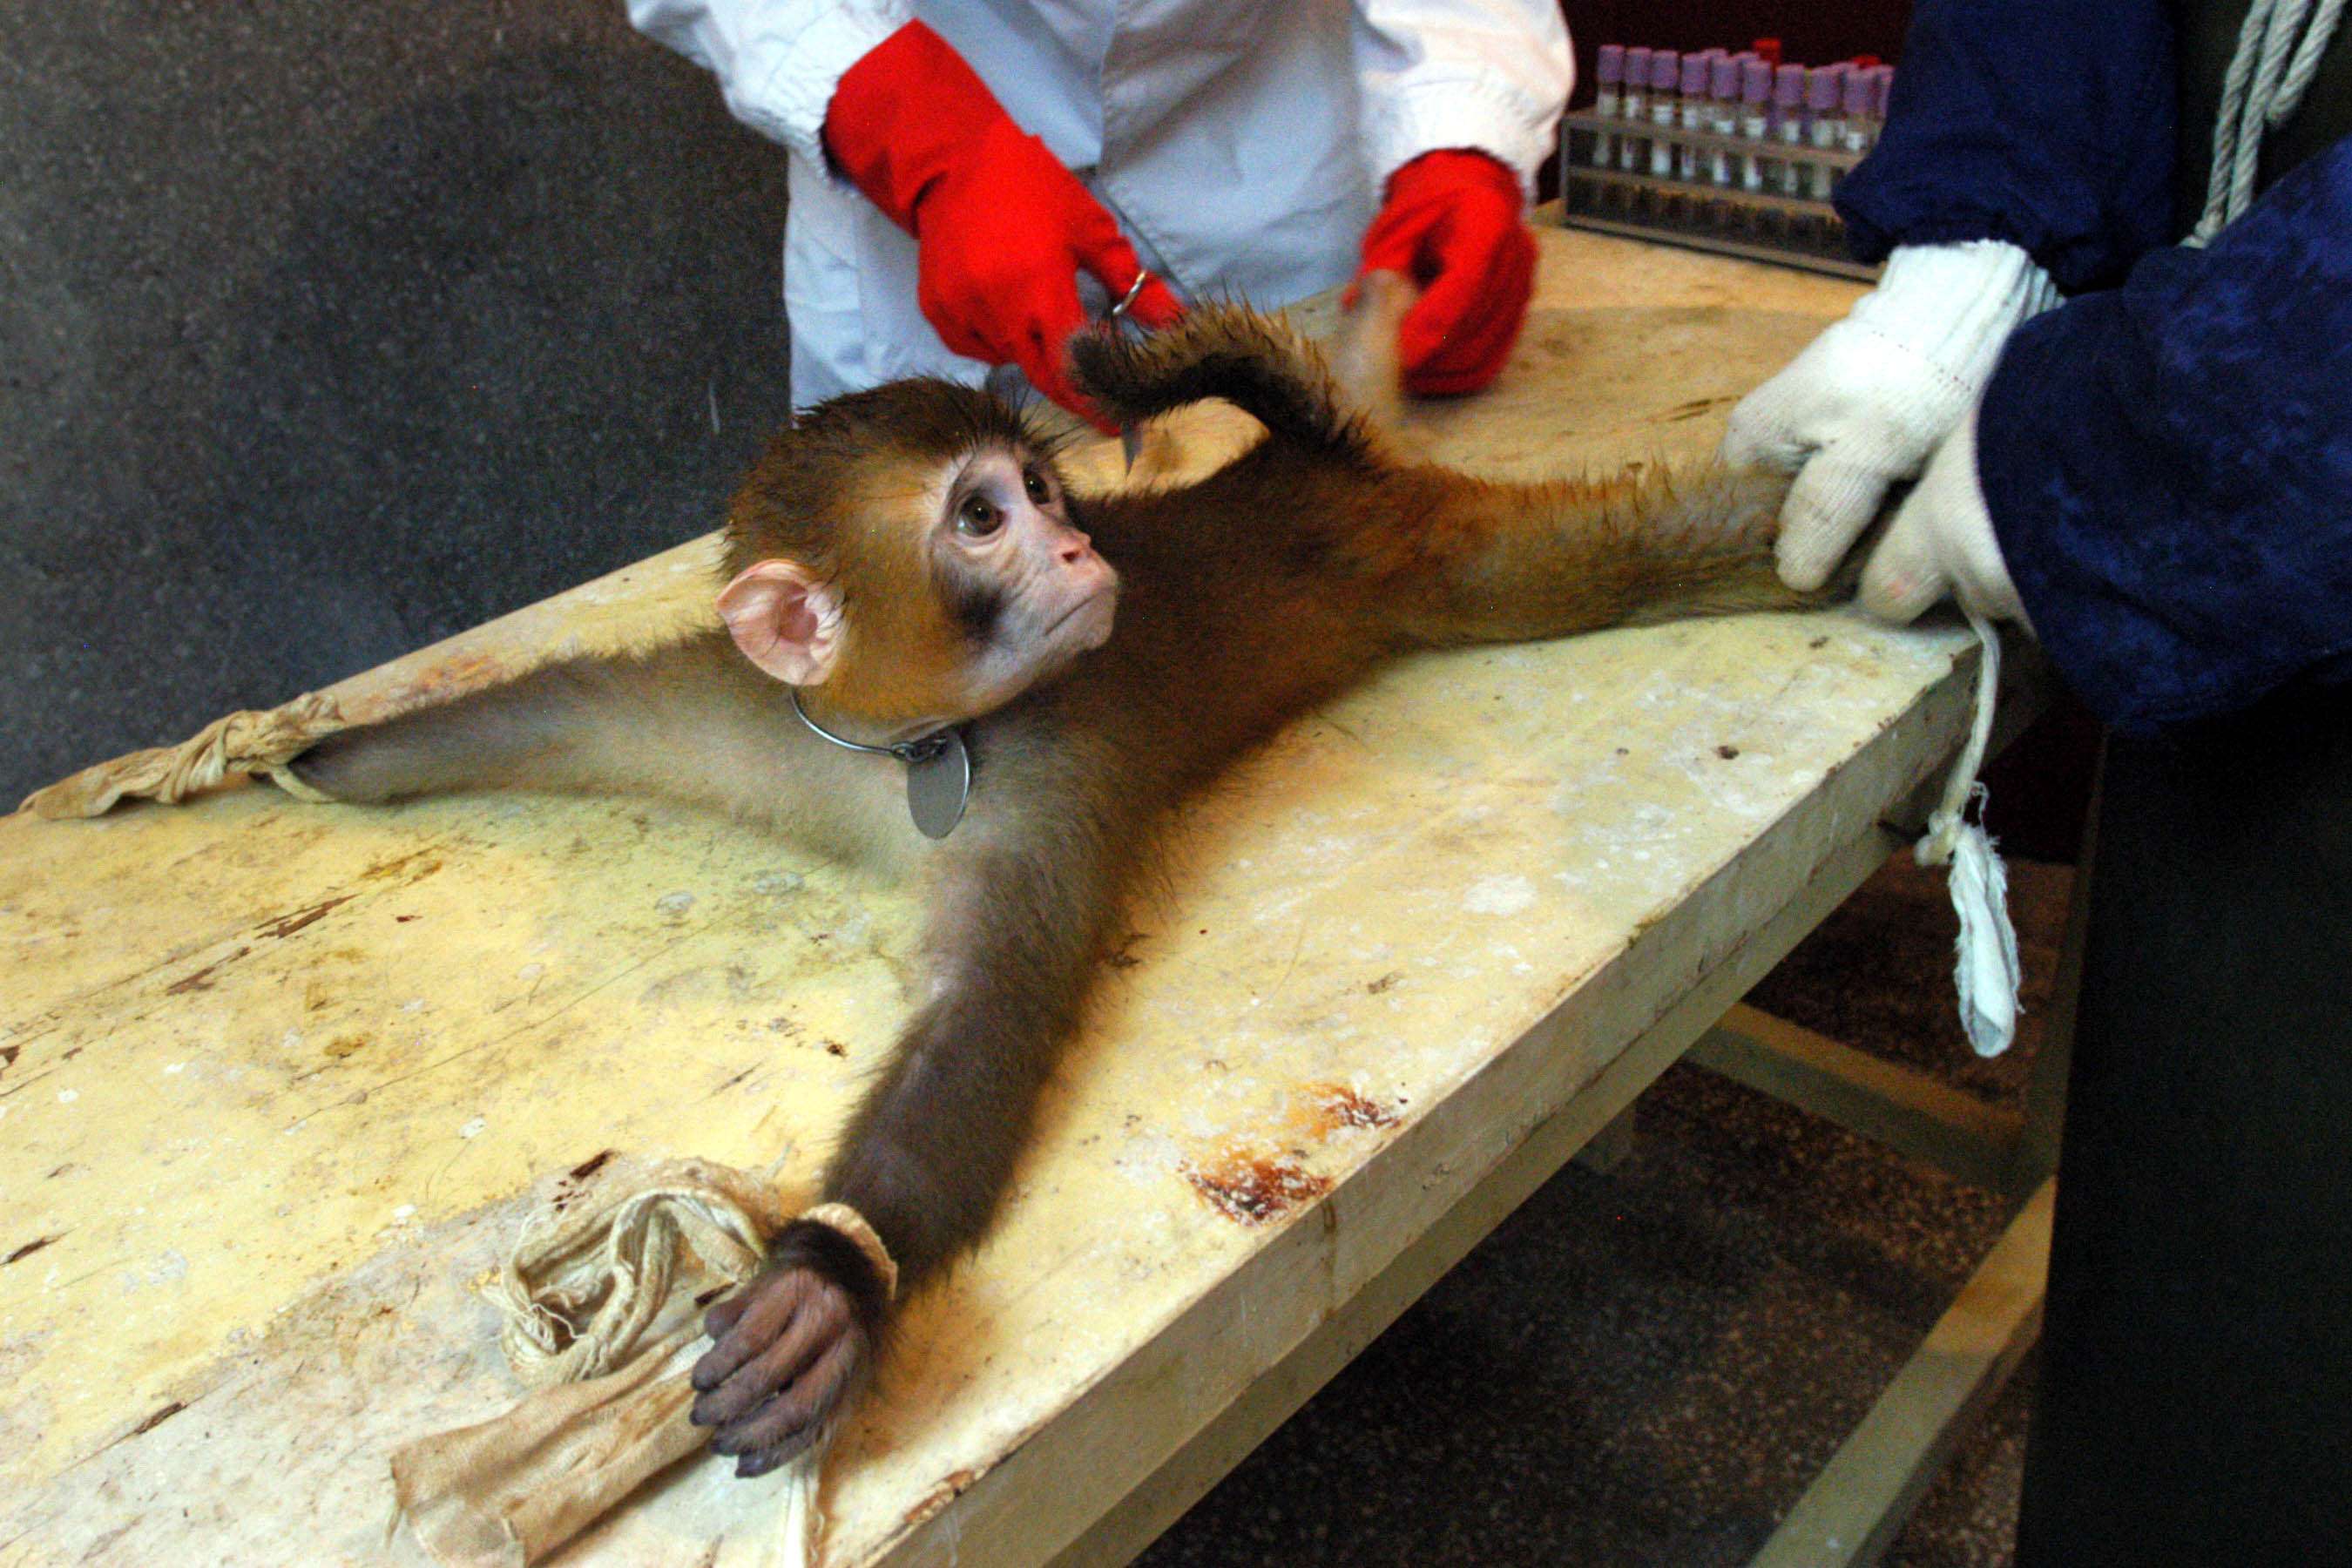 There are cruelty-free alternatives to using live animals for scientific research and medical training. Photo: Xinhua